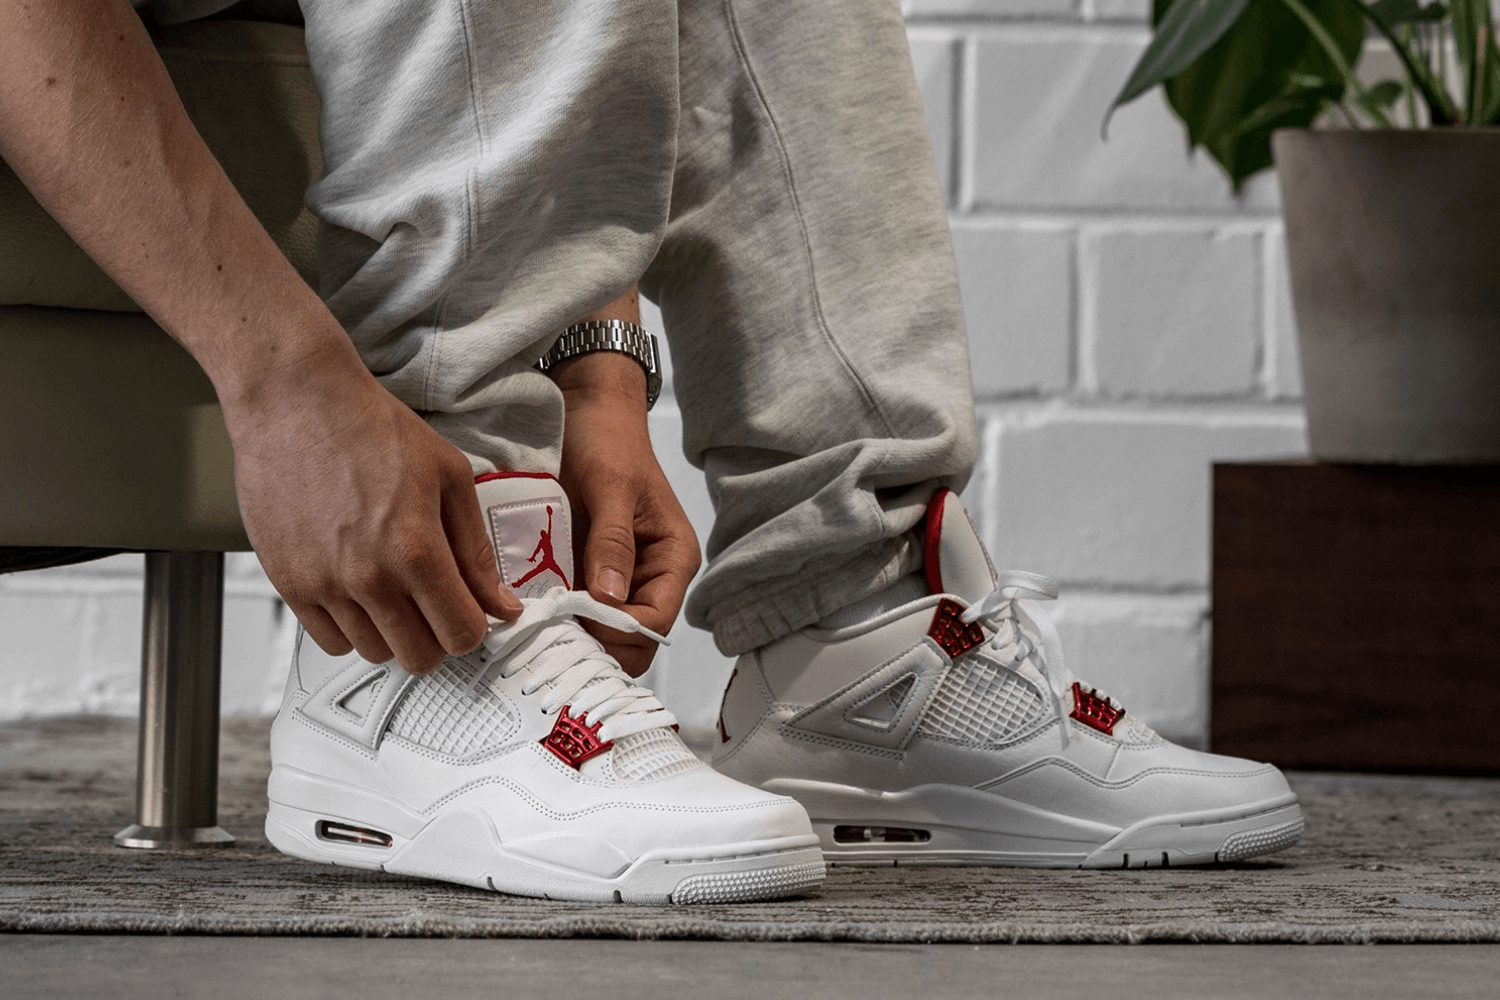 How to style the Air Jordan 4